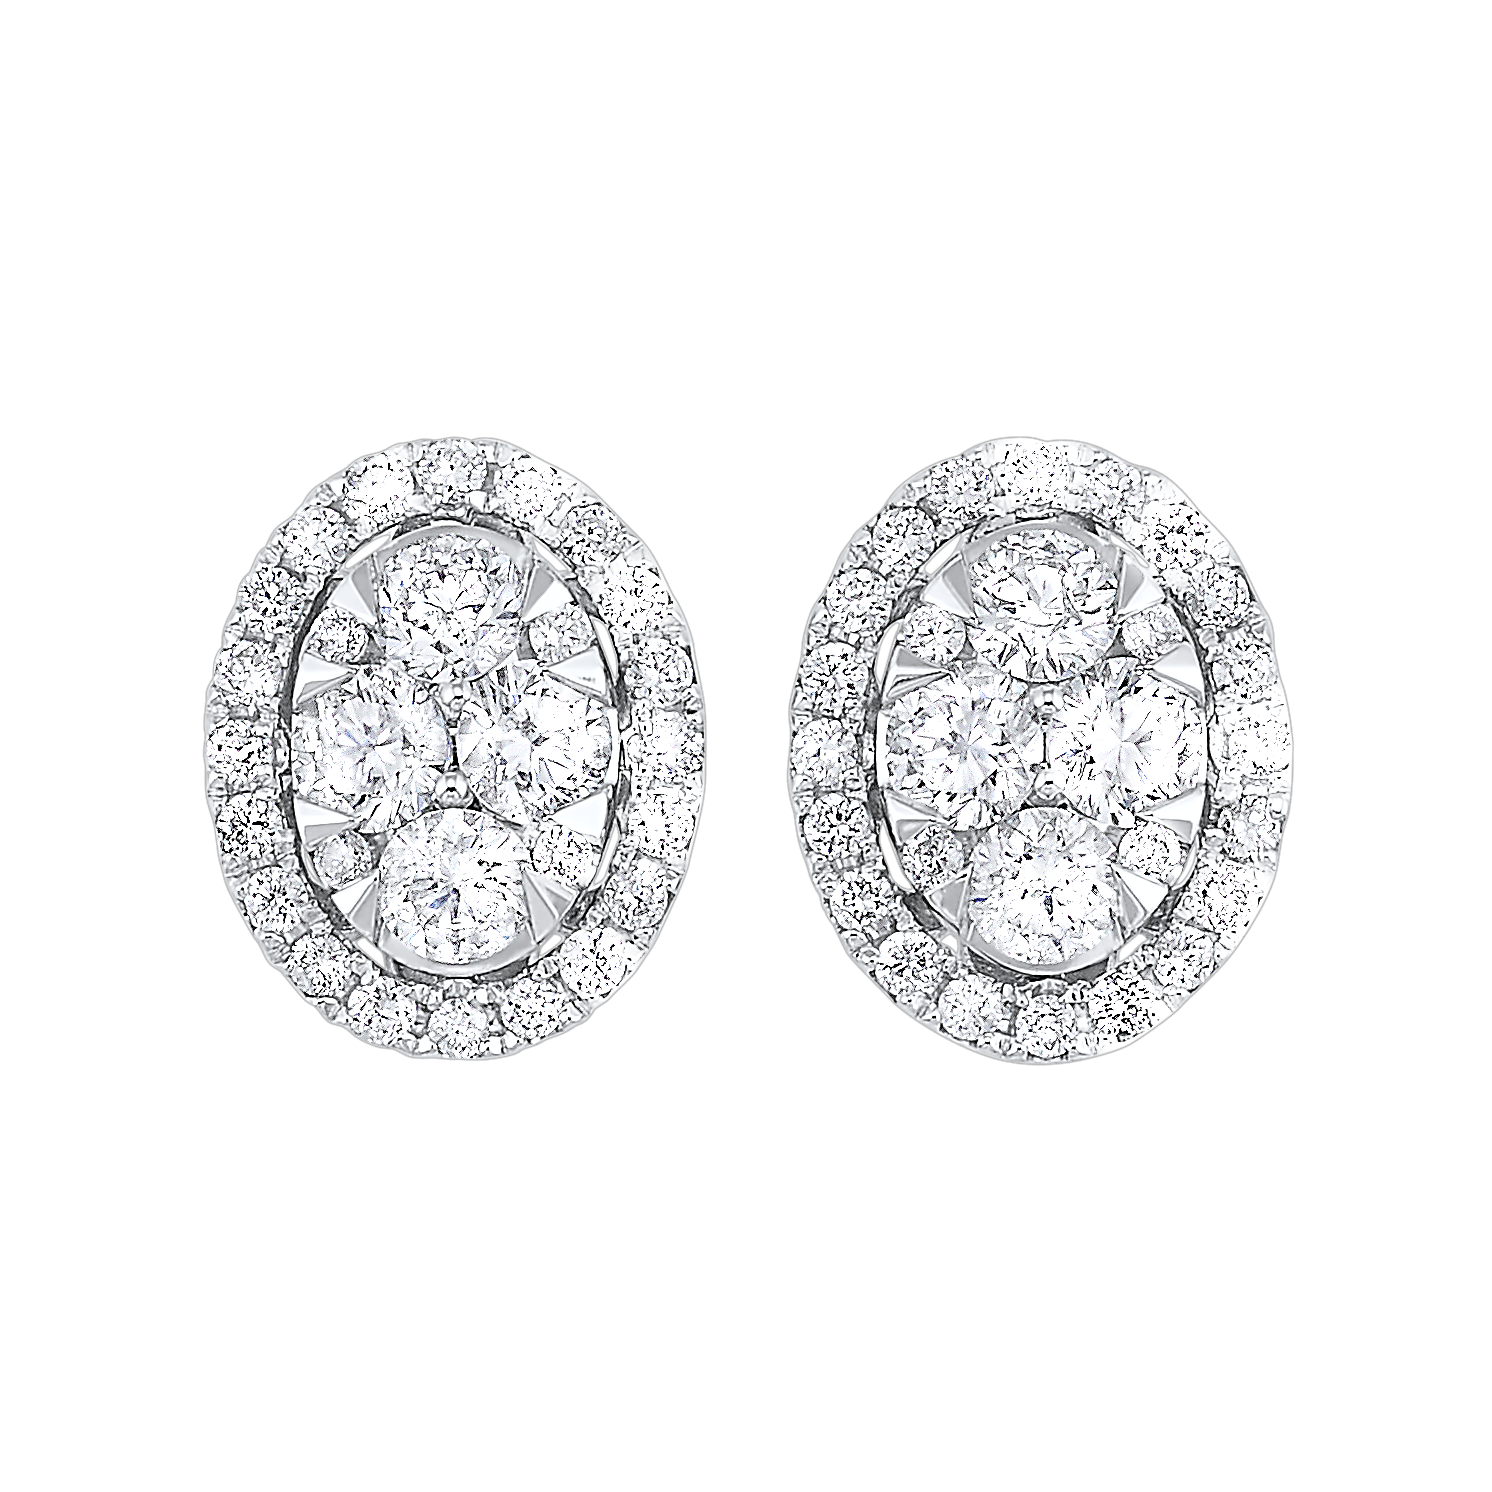 BW James Jewelers Earrings 16 Page Christmas Catalog Offer 14KTW Uno Round Earrings 1 Ctw